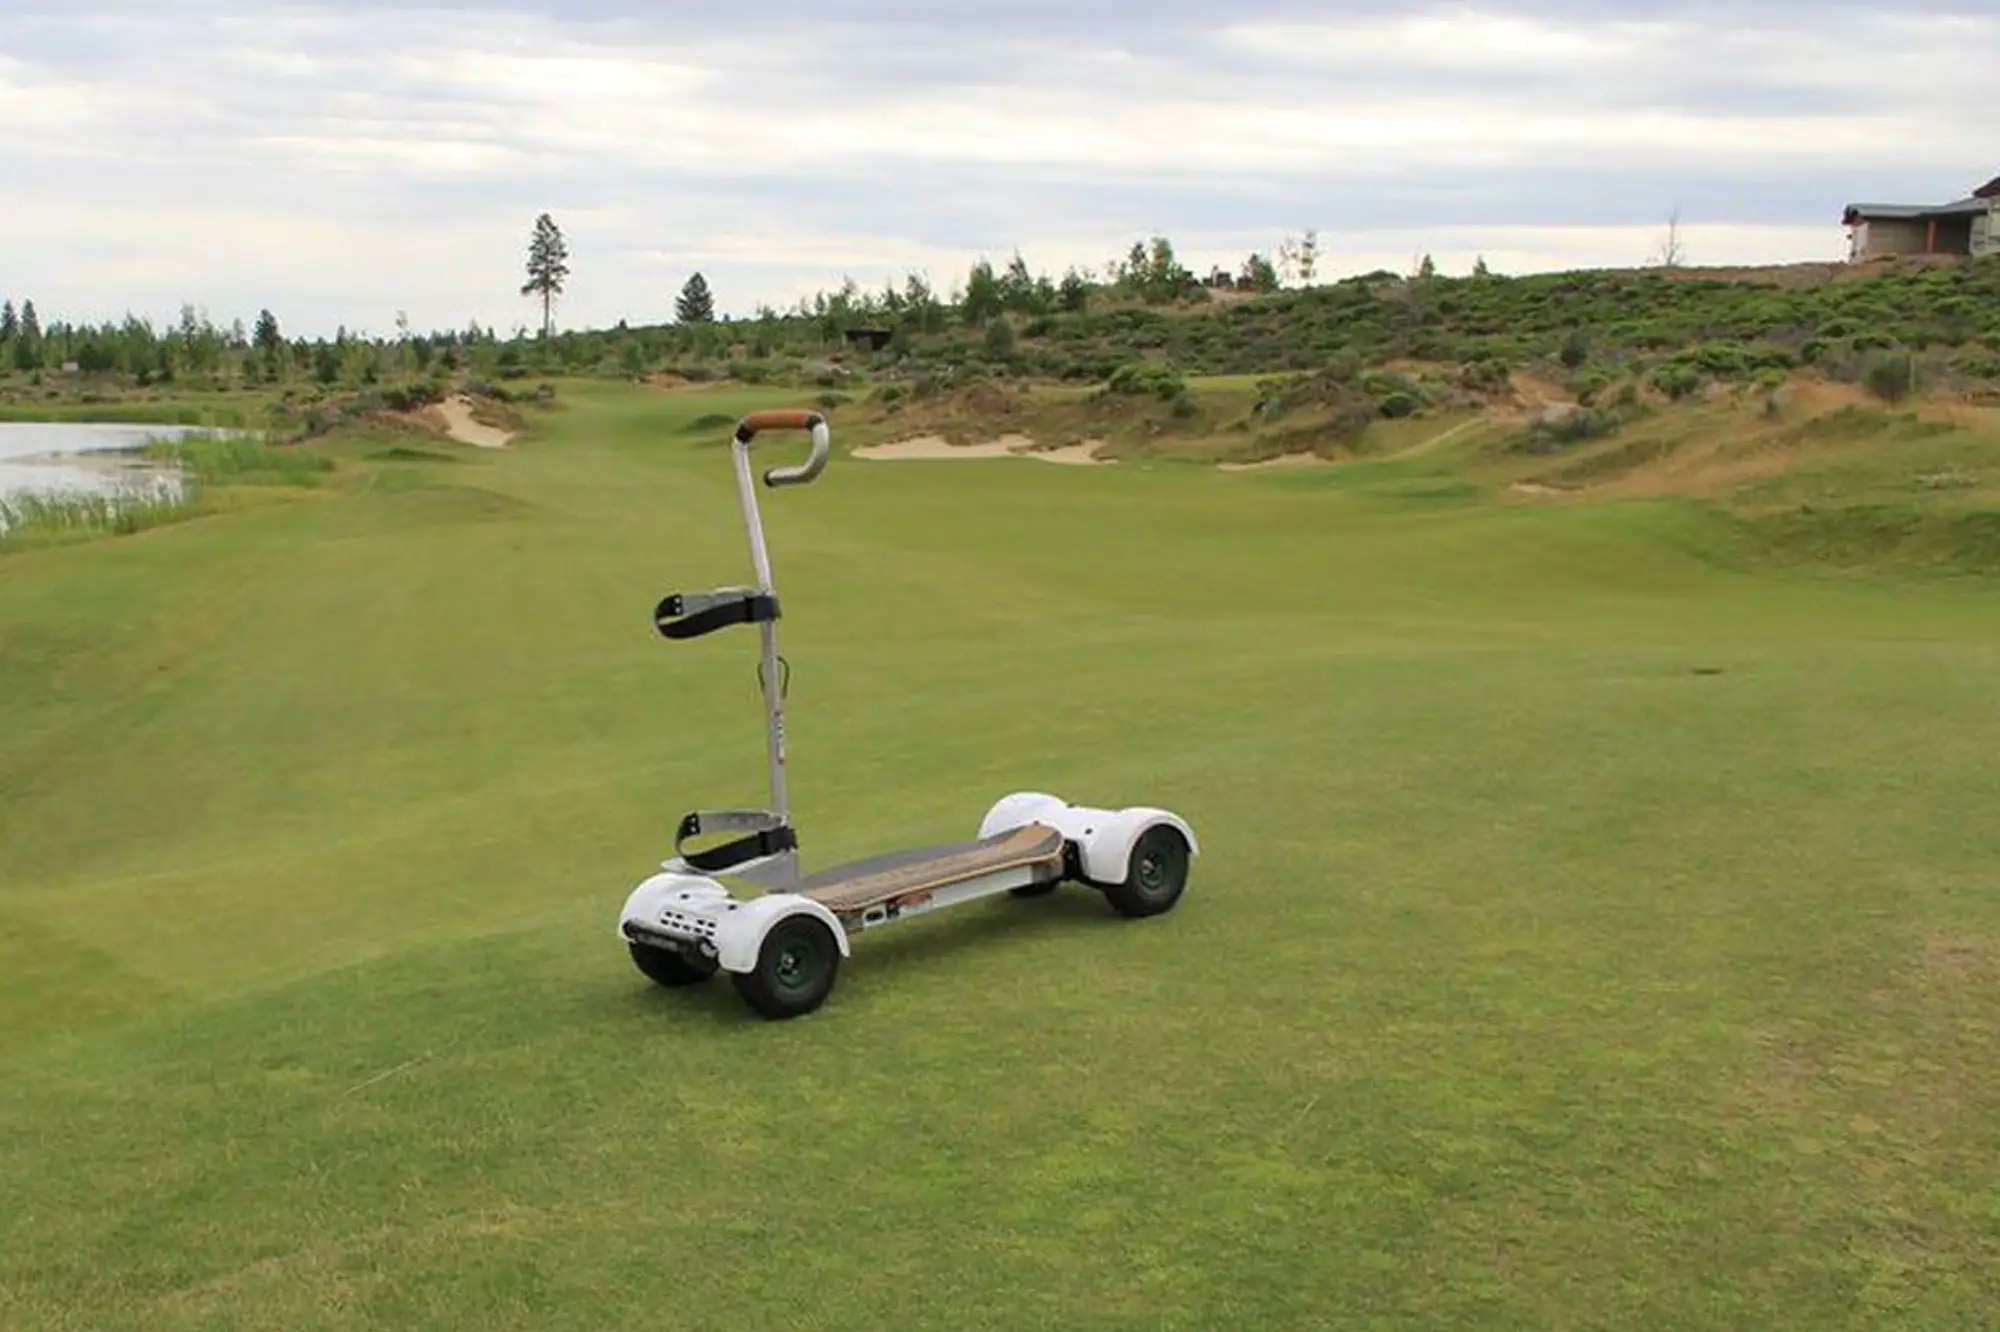 an in-depth review of the best electric golf trolleys of 2018.